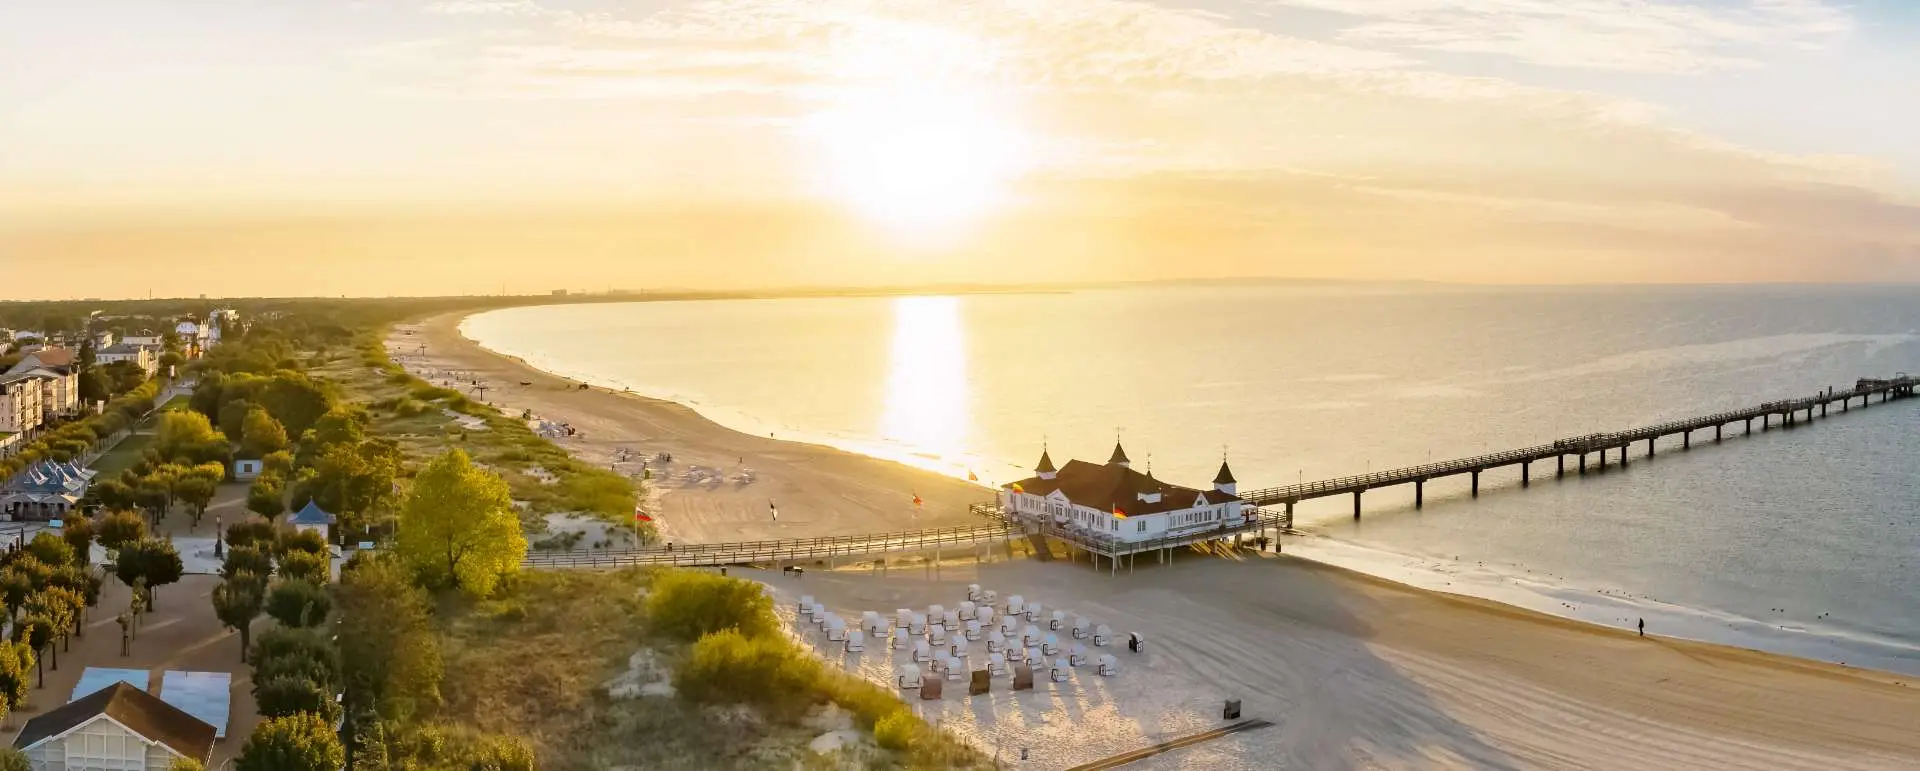 Usedom - the destination for families